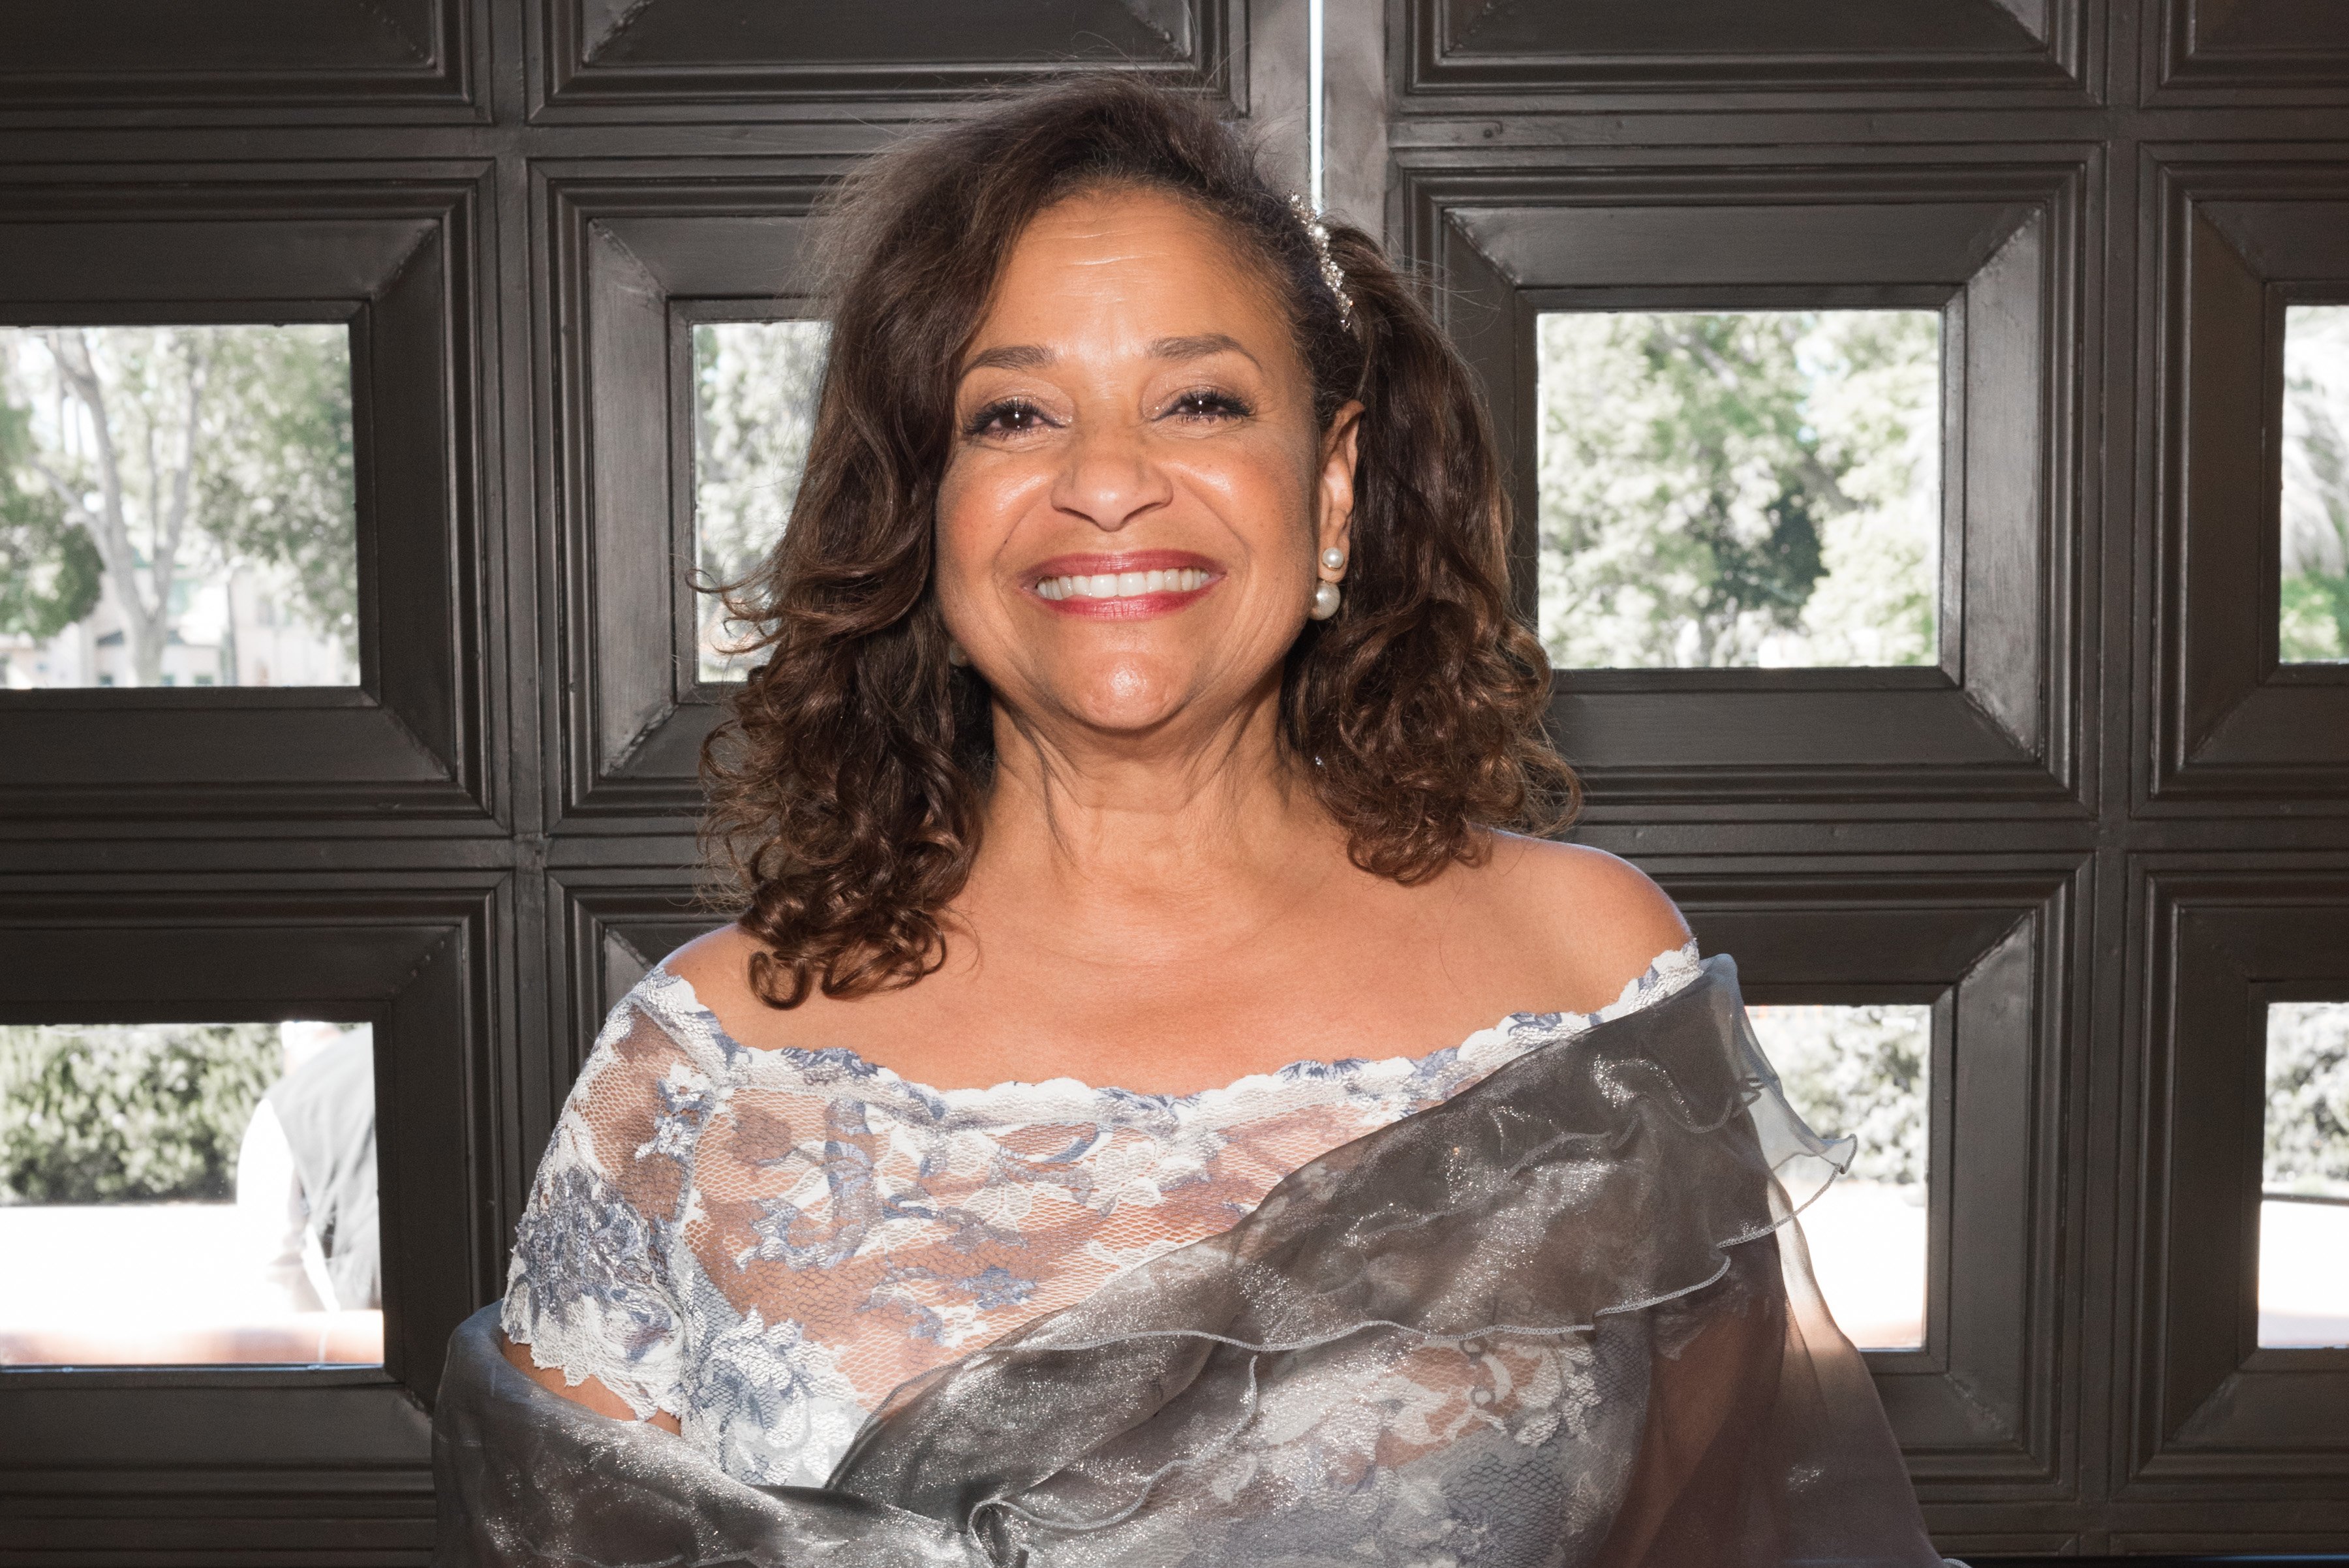 Debbie Allen at the "Turn Me Loose" - Red Carpet event at Wallis Annenberg Center for the Performing Arts in Beverly Hills, California on October 15, 2017. | Photo: Getty Images